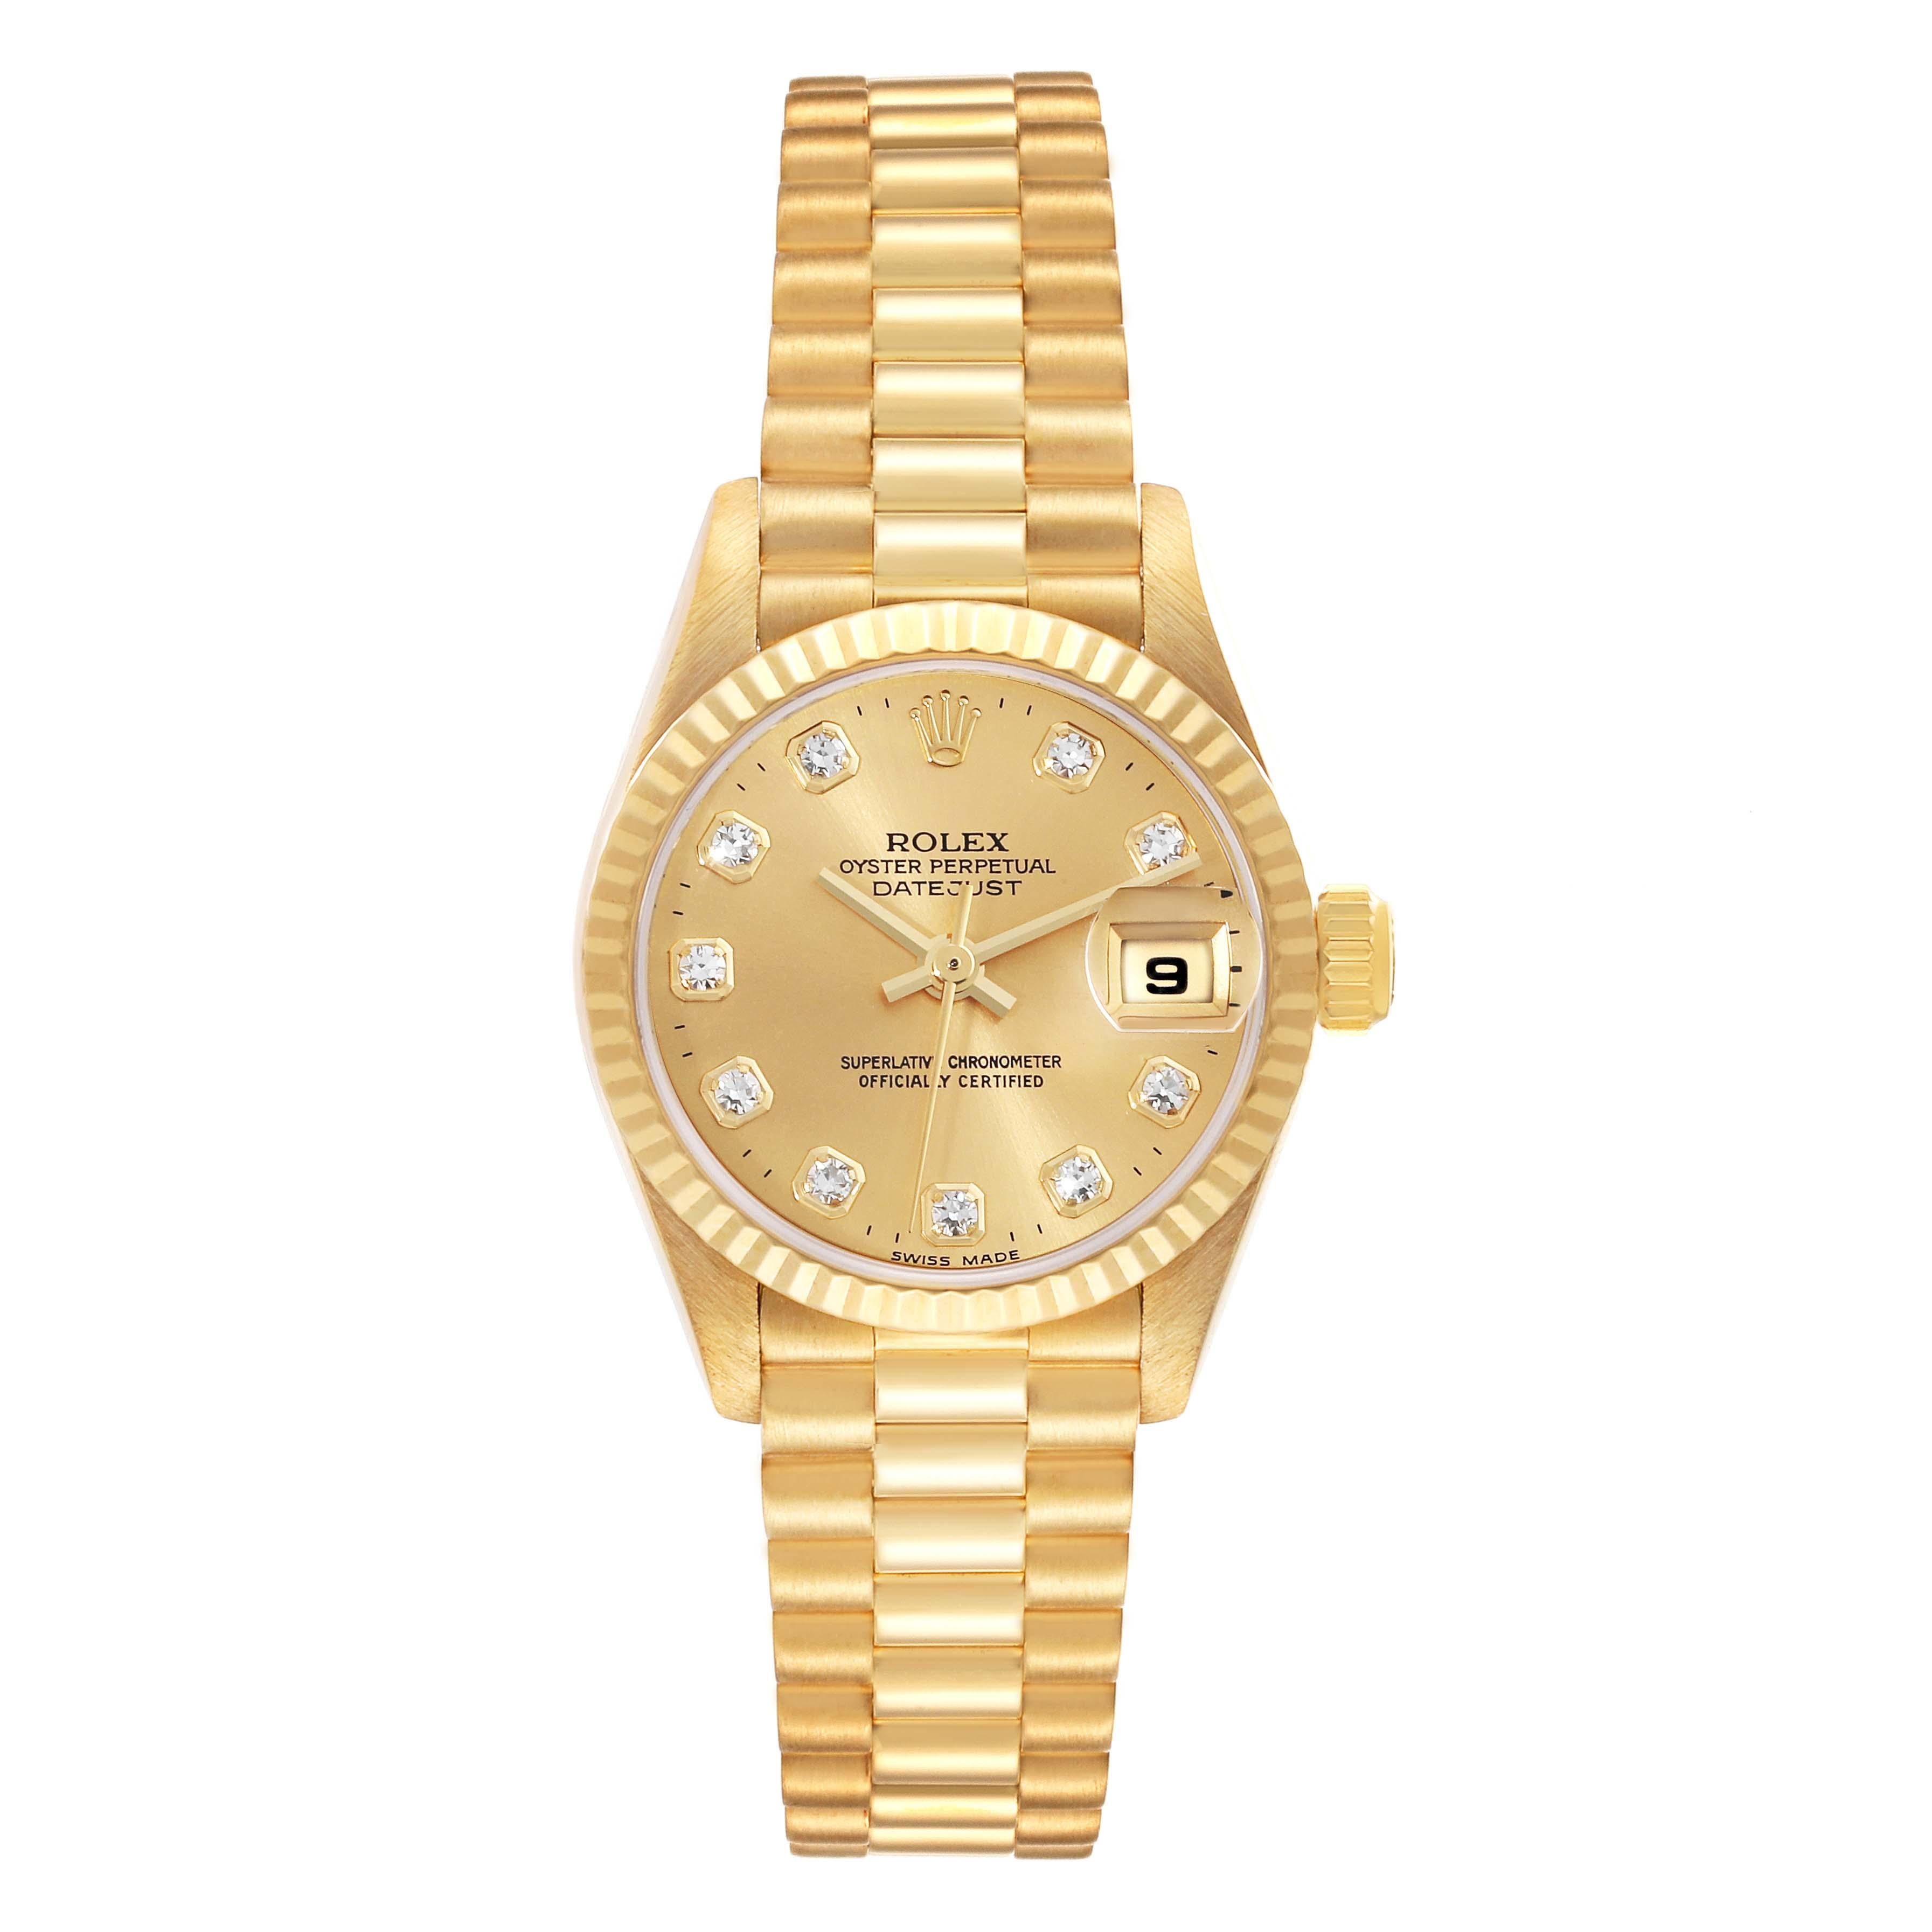 Rolex President Datejust Yellow Gold Diamond Dial Ladies Watch 79178. Officially certified chronometer automatic self-winding movement. 18k yellow gold oyster case 26.0 mm in diameter. Rolex logo on a crown. 18k yellow gold fluted bezel. Scratch